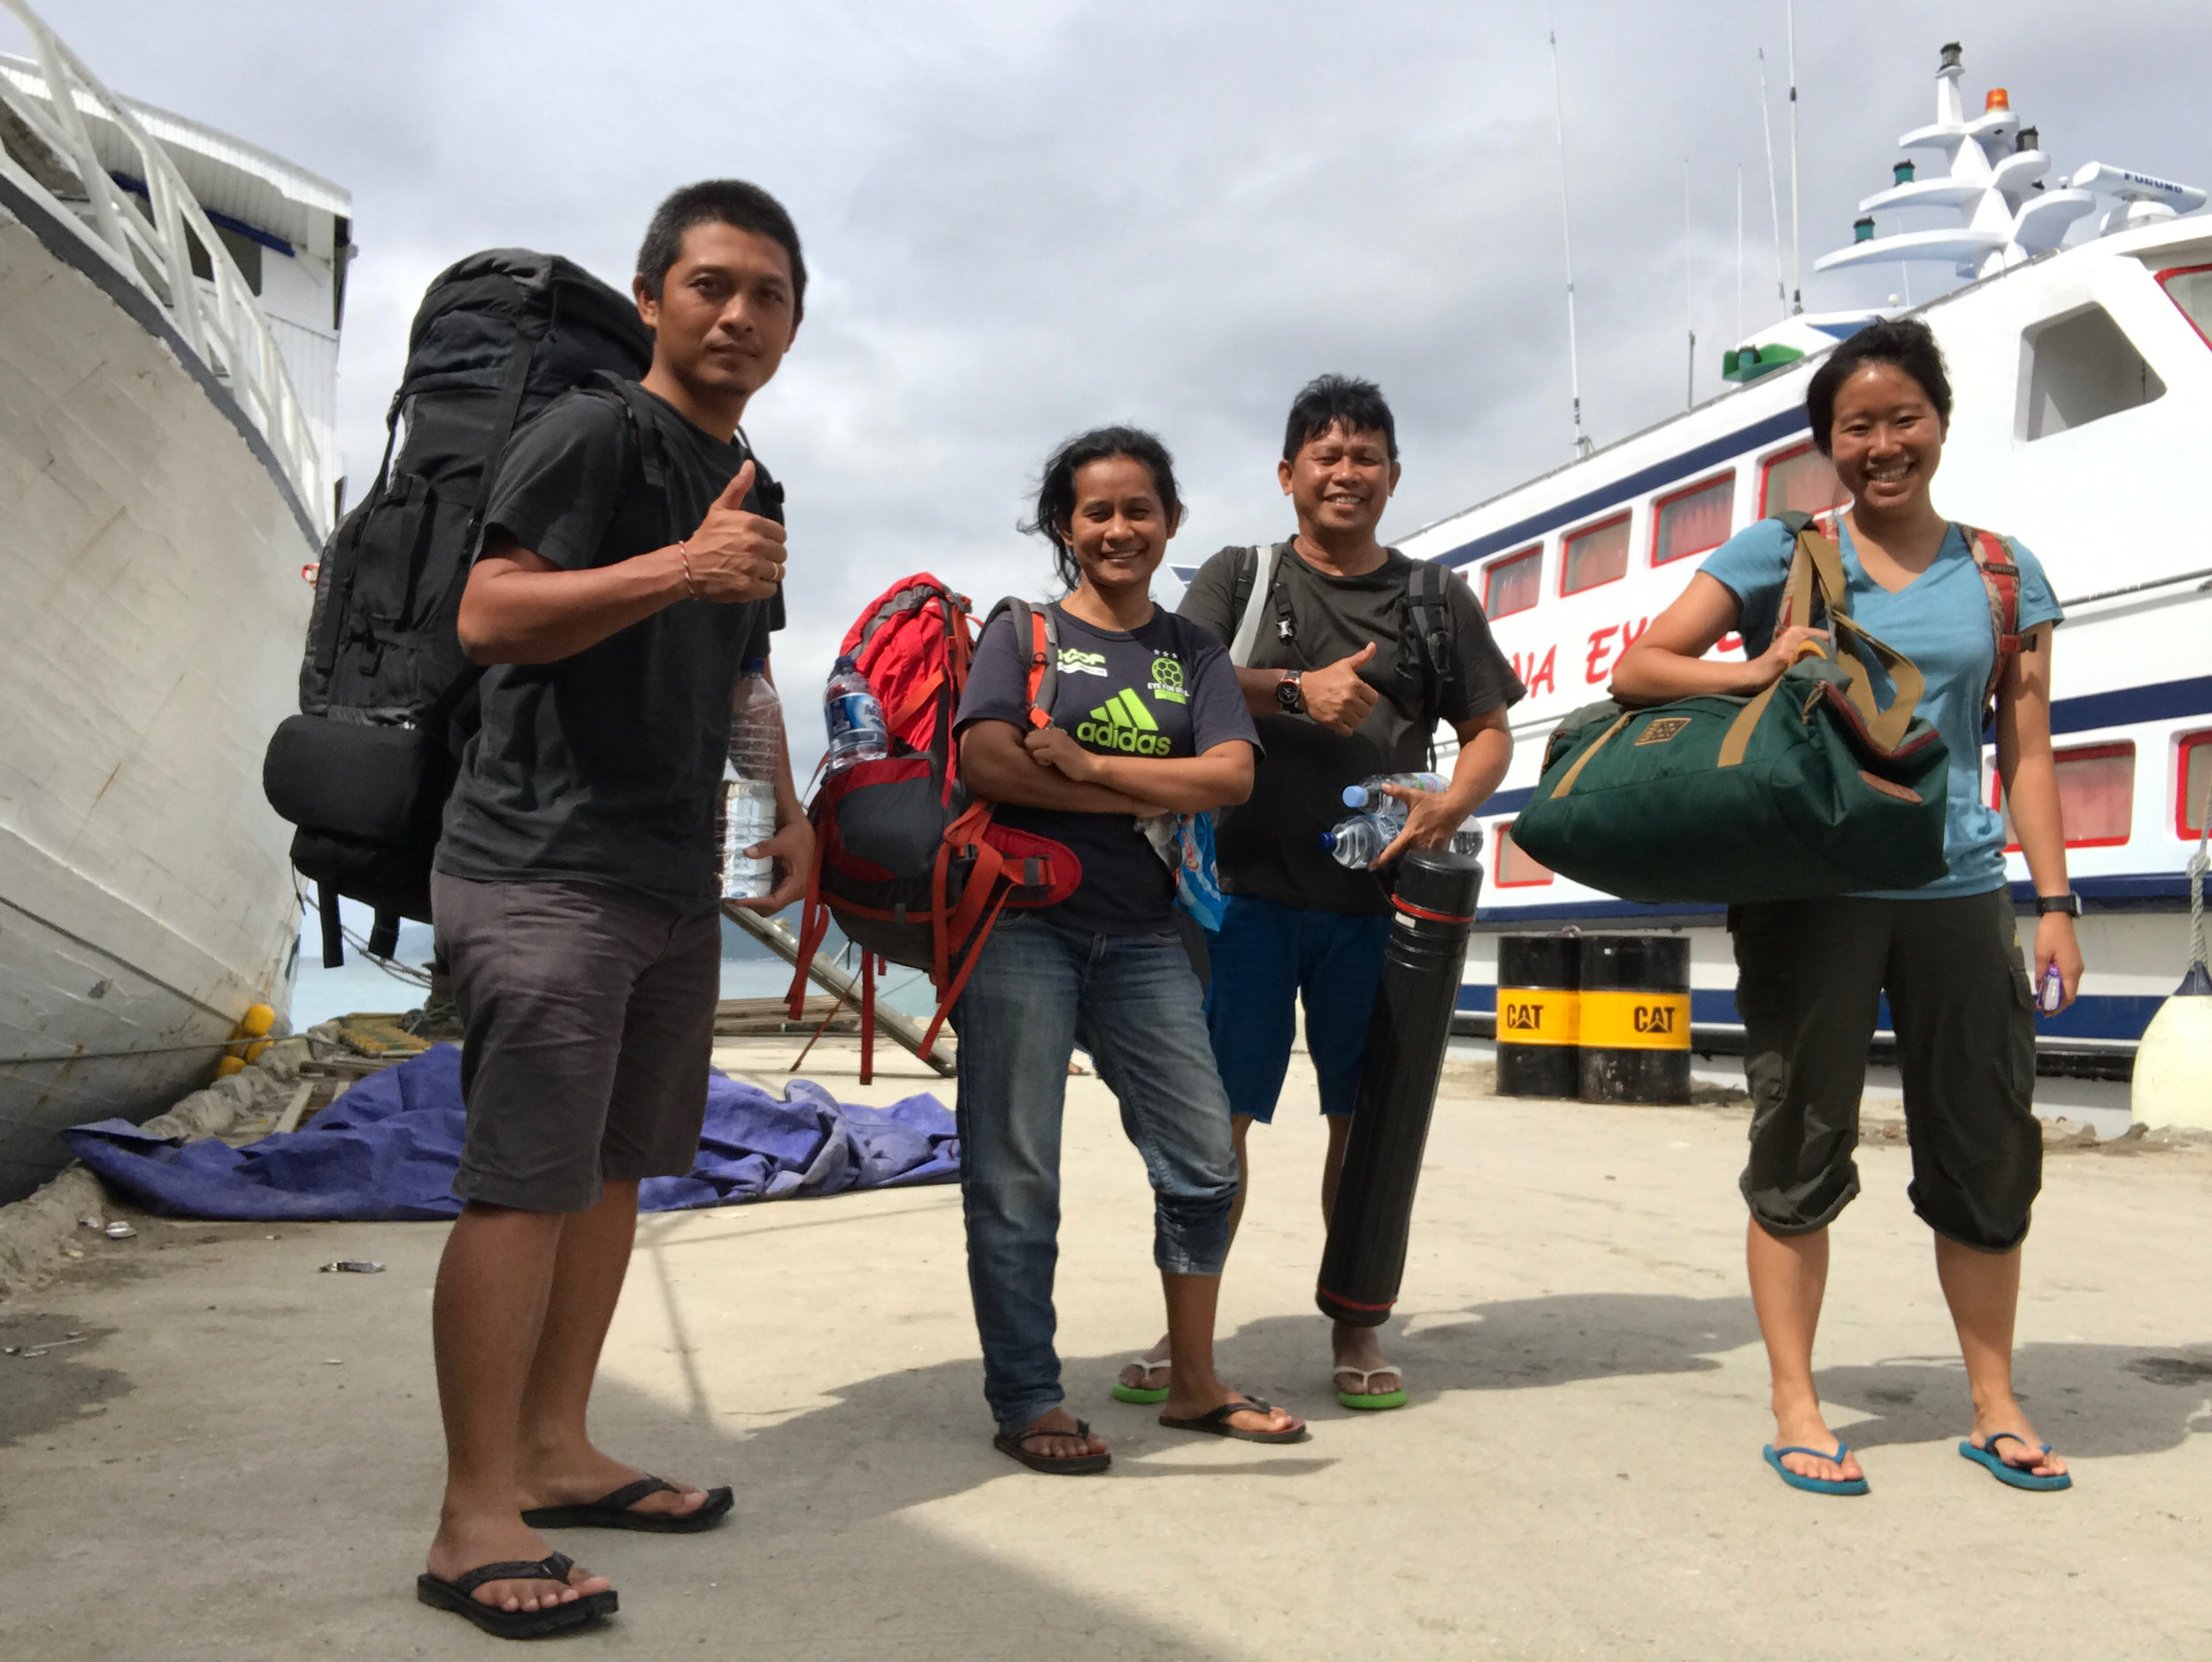  Elle (far right) on her travels to Kasuari village. It took three days of travel by air, land, and sea! 